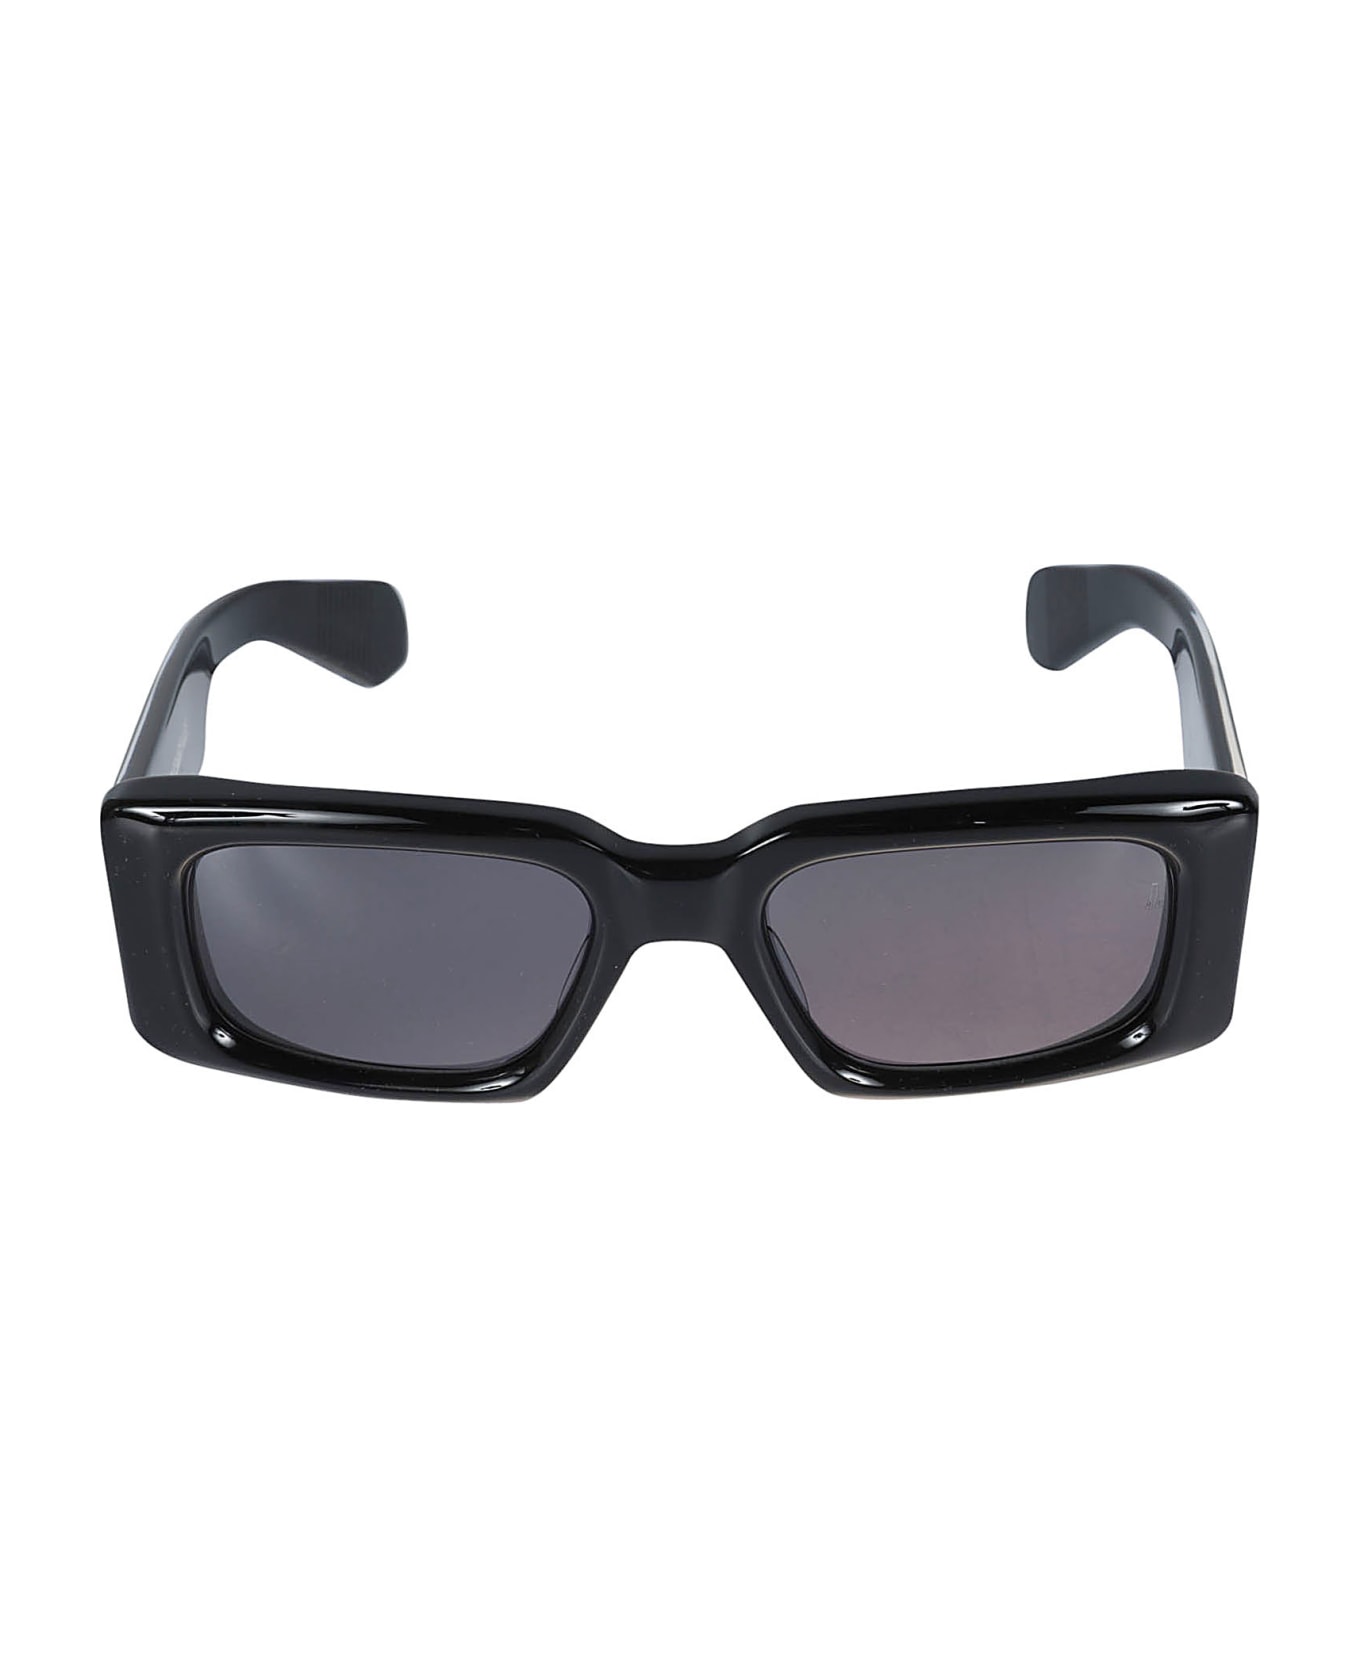 Jacques Marie Mage Rectangle Thick Sunglasses - shadow